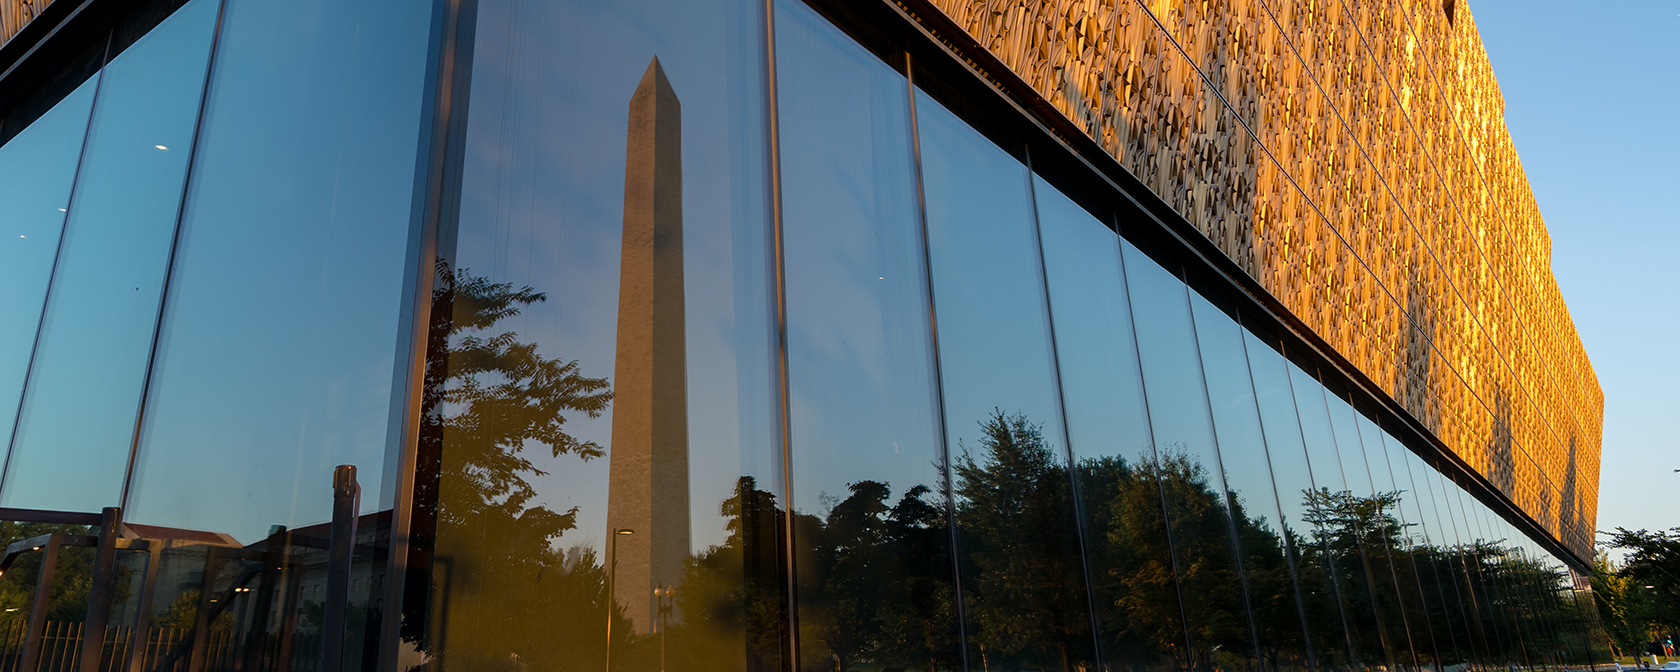 NMAAHC in Summer